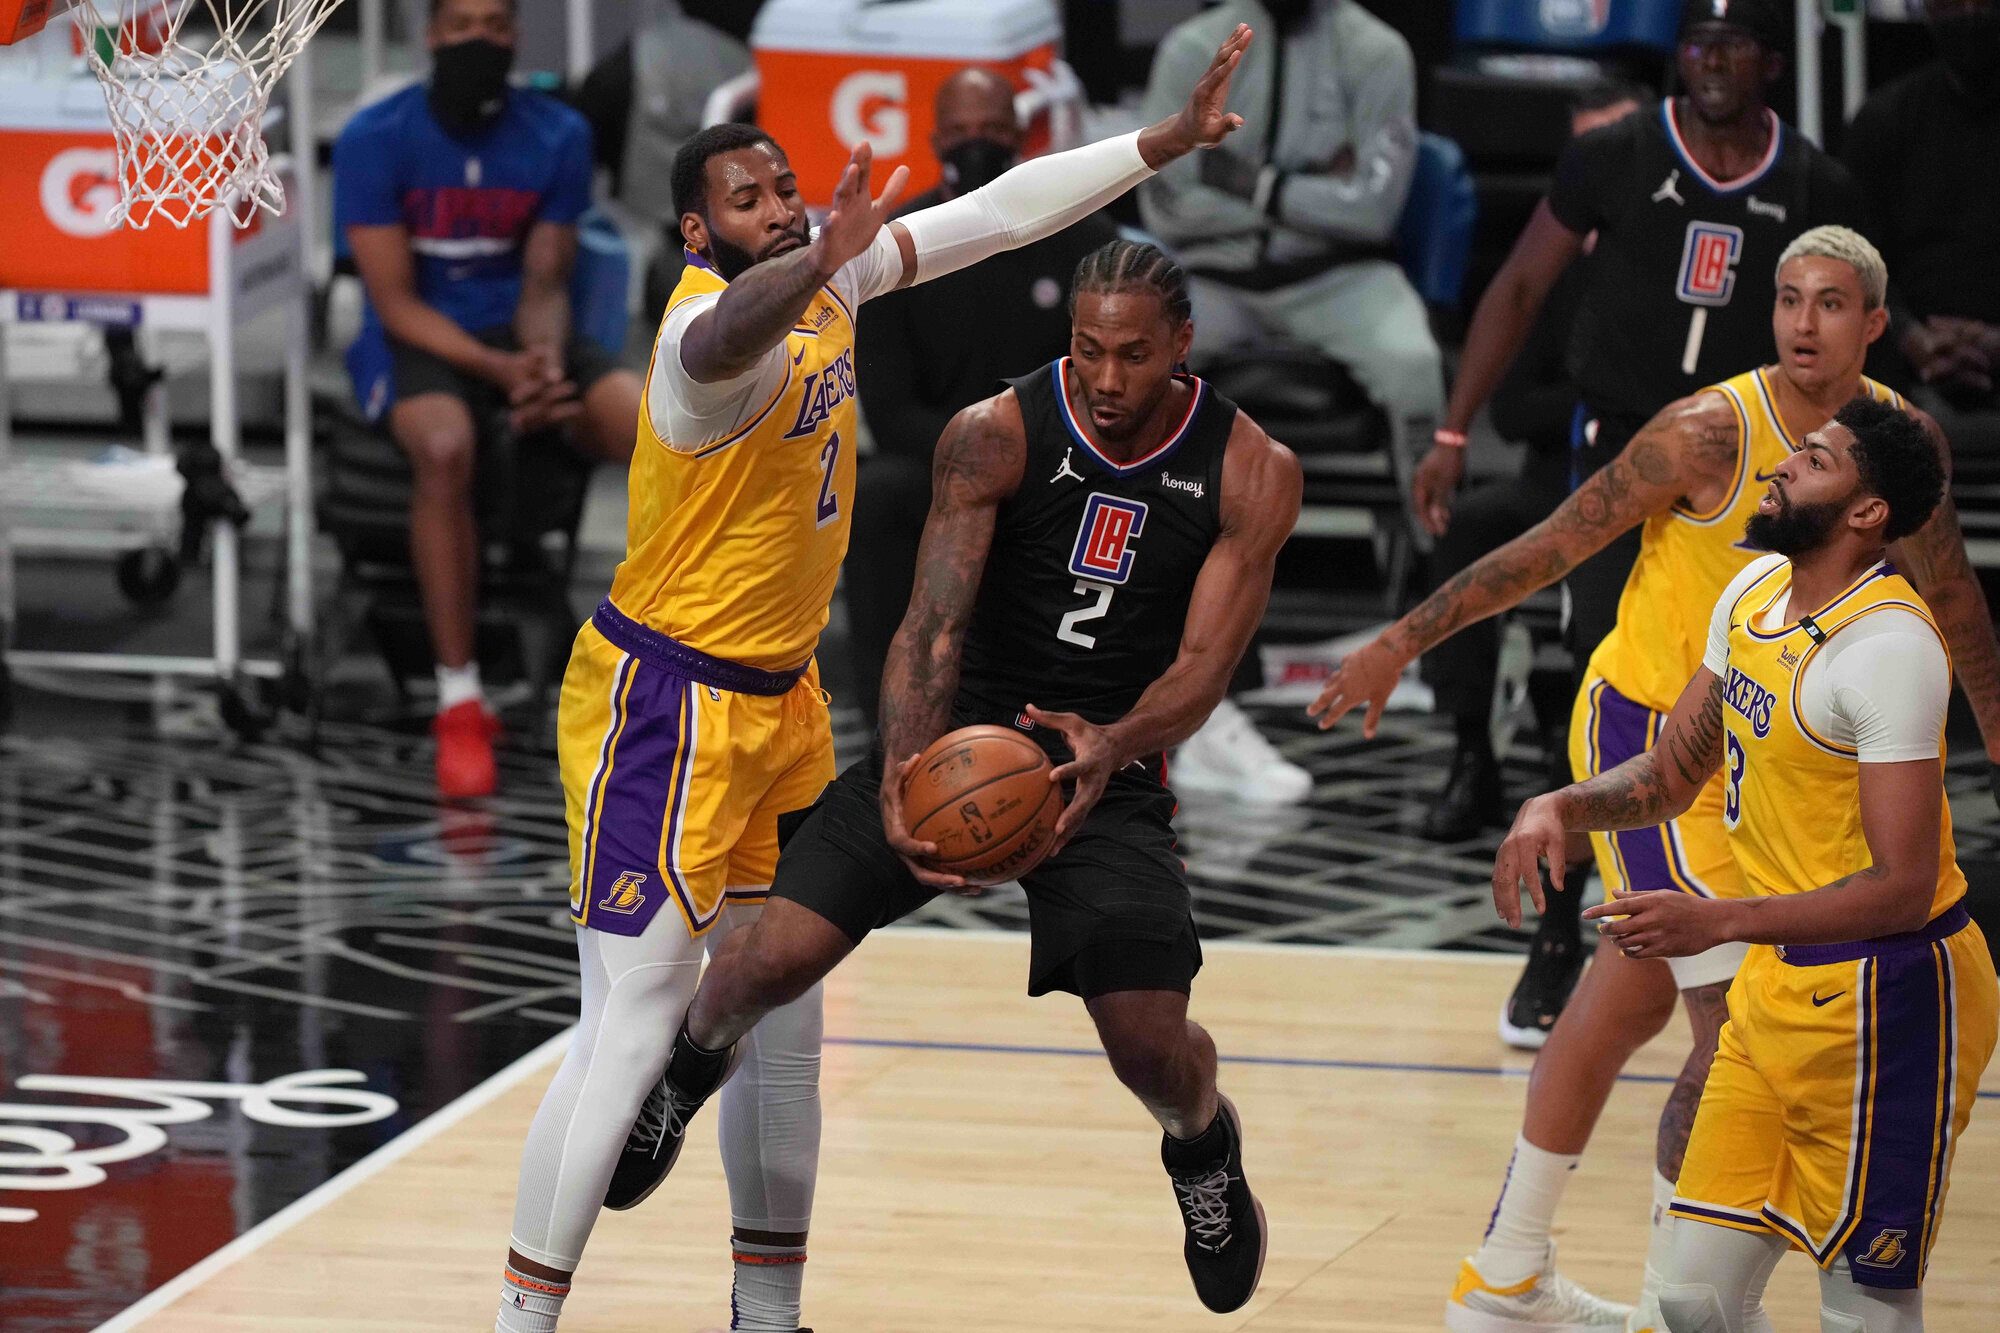 While the Lakers race against time, the Clippers aim for excellence